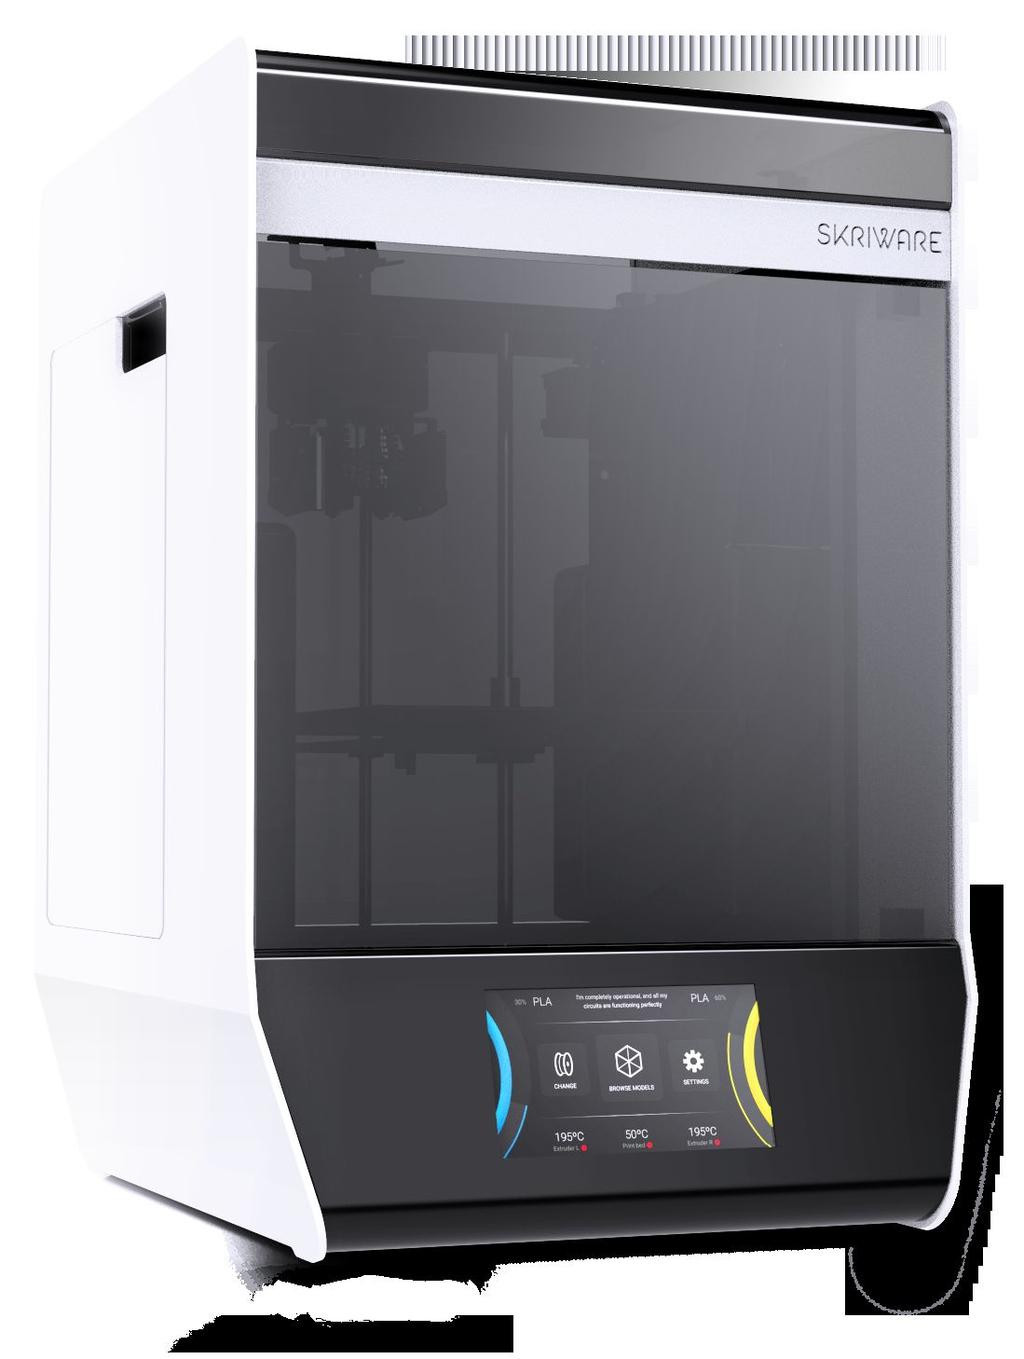 SKRIWARE 2 Printer properties Printer control via full color 7 touchscreen Supported materials: PLA, ABS, PVA, PET, NYLON PLA, PET, FLEX, PVA, NYLON, HIPS, ABS and more Connection: Wifi and Ethernet